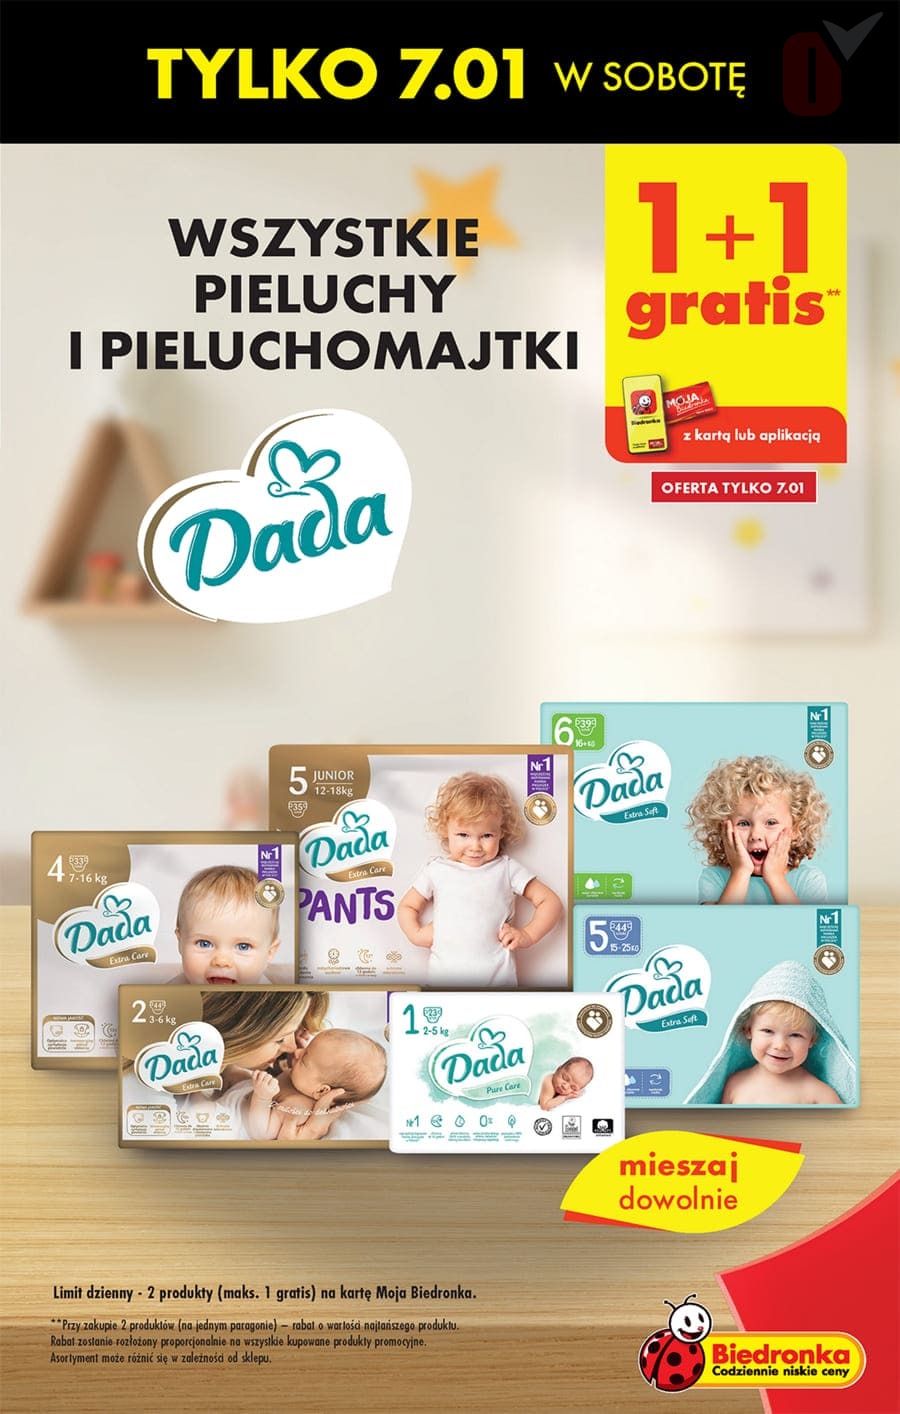 pampers premium care czy pampers new baby